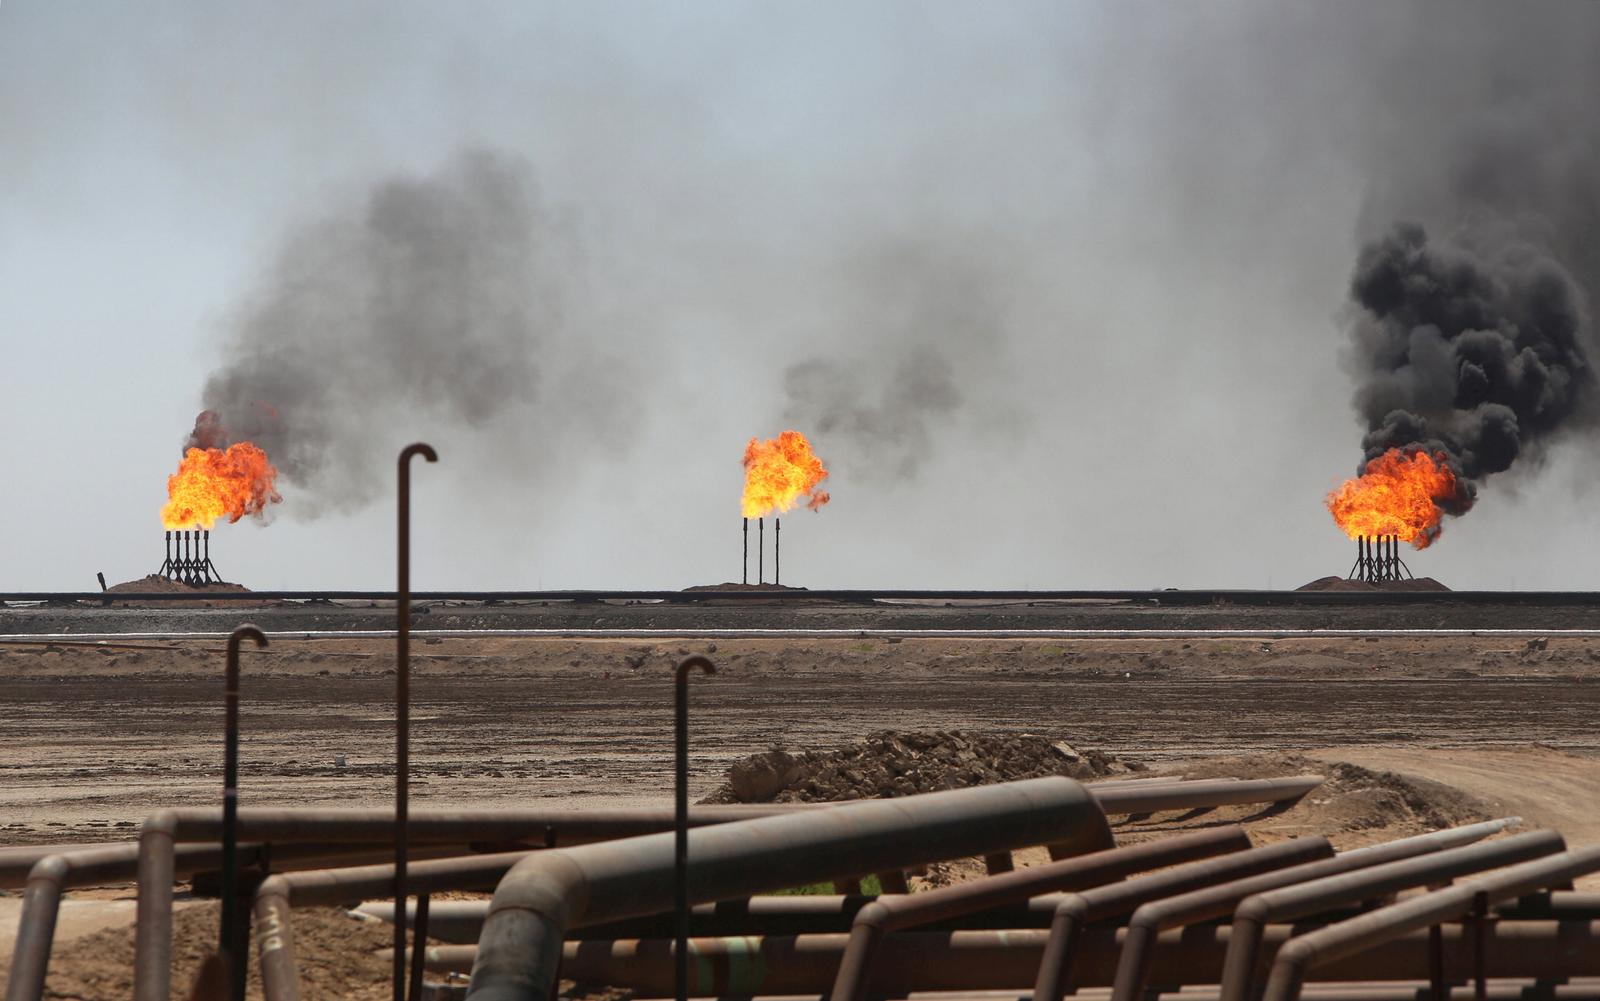 Gas pipeline blast in southern Iraq kills 2, injures 51, police say